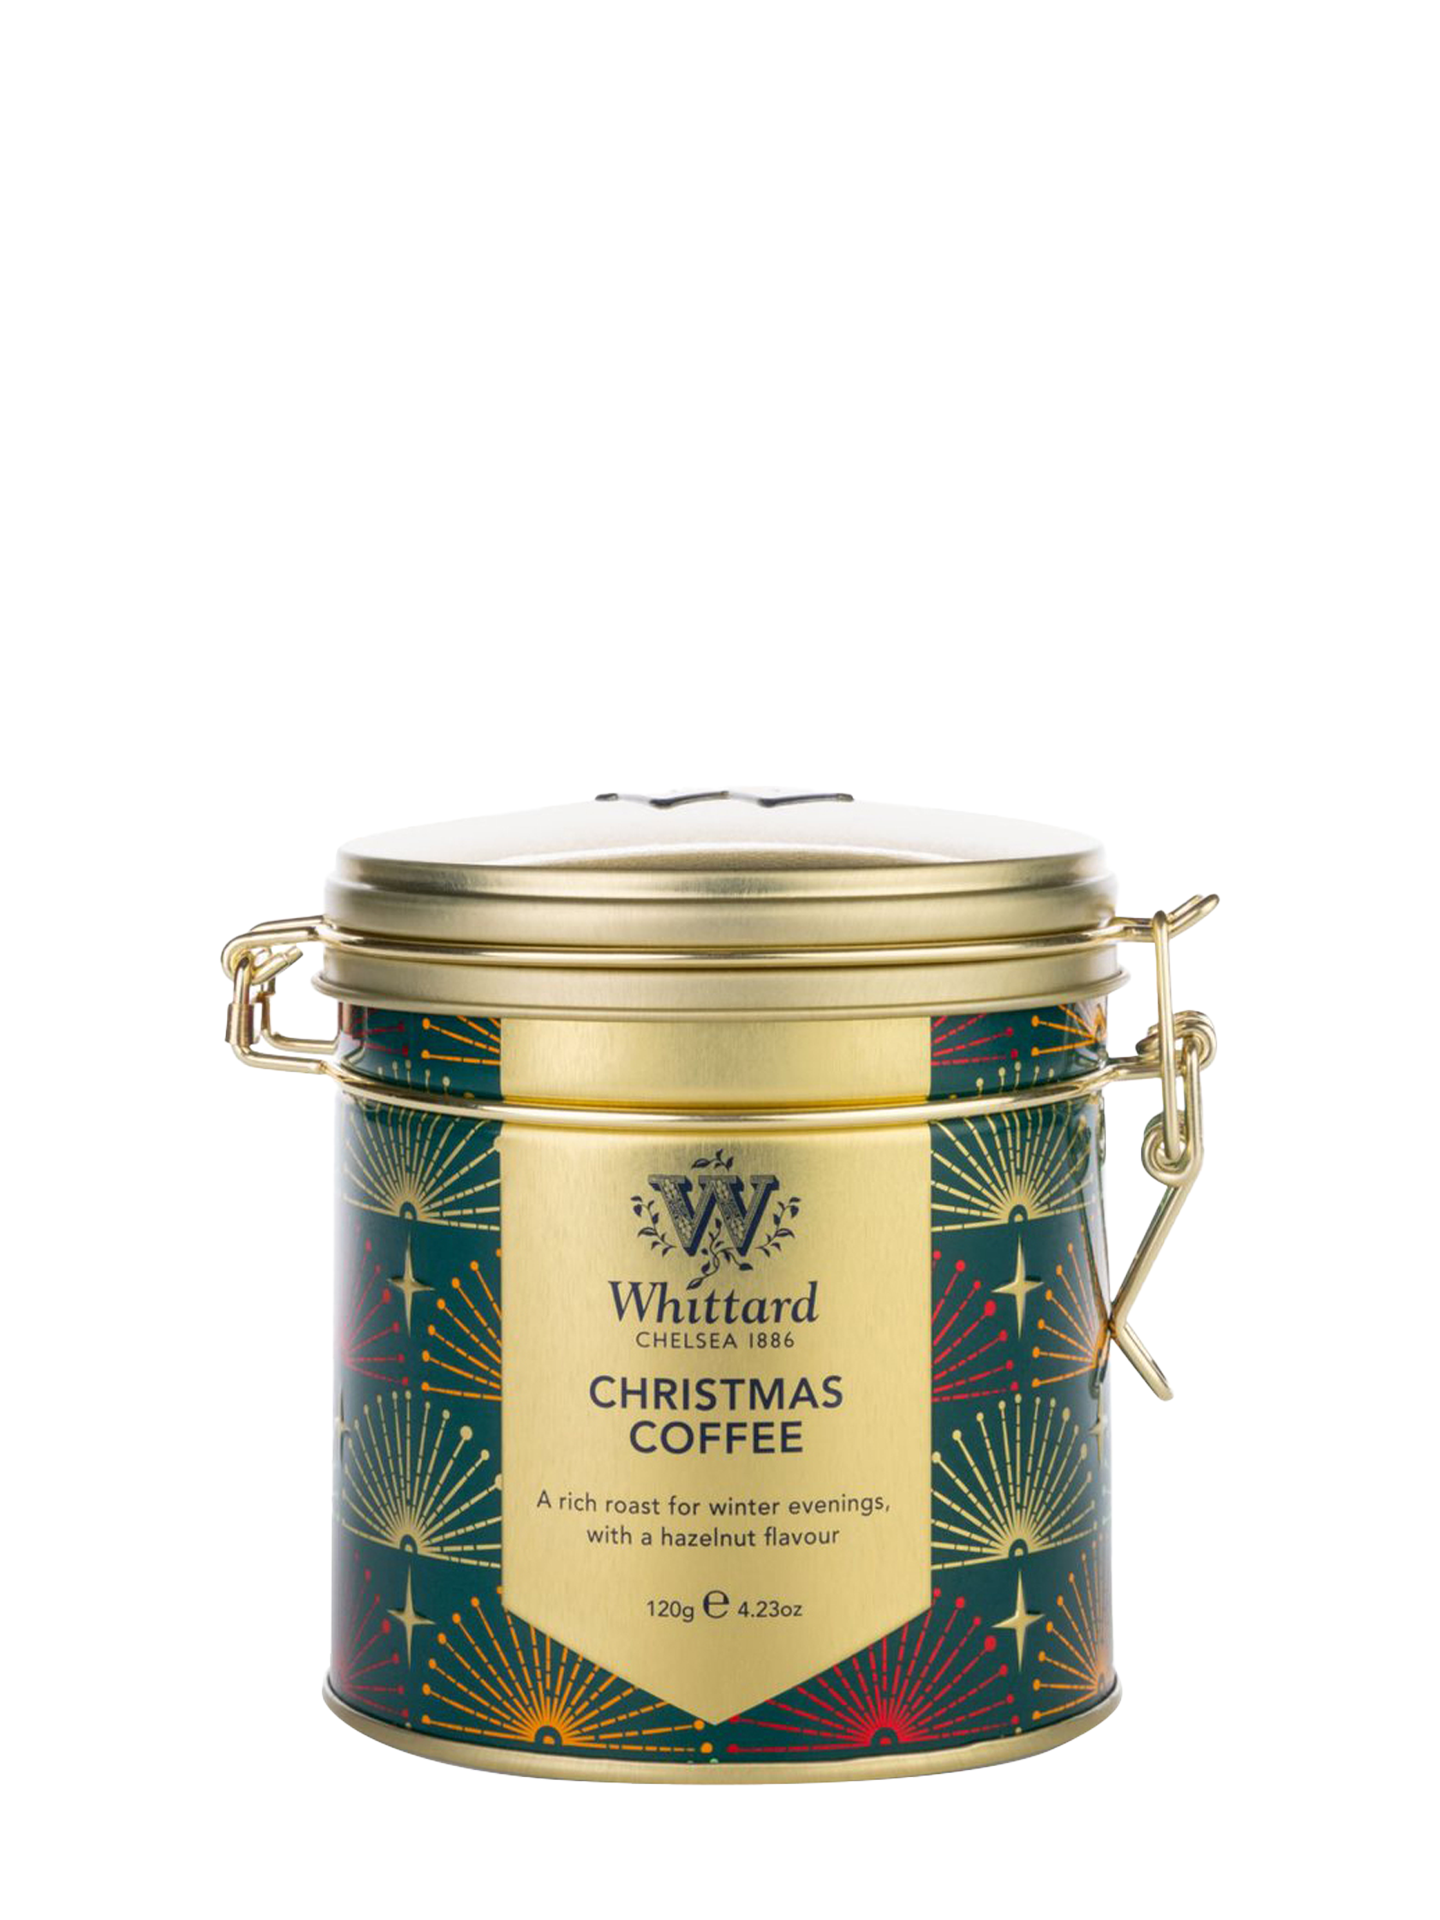 Christmas Coffee in tin can, ground coffee with hazelnut flavor 120g